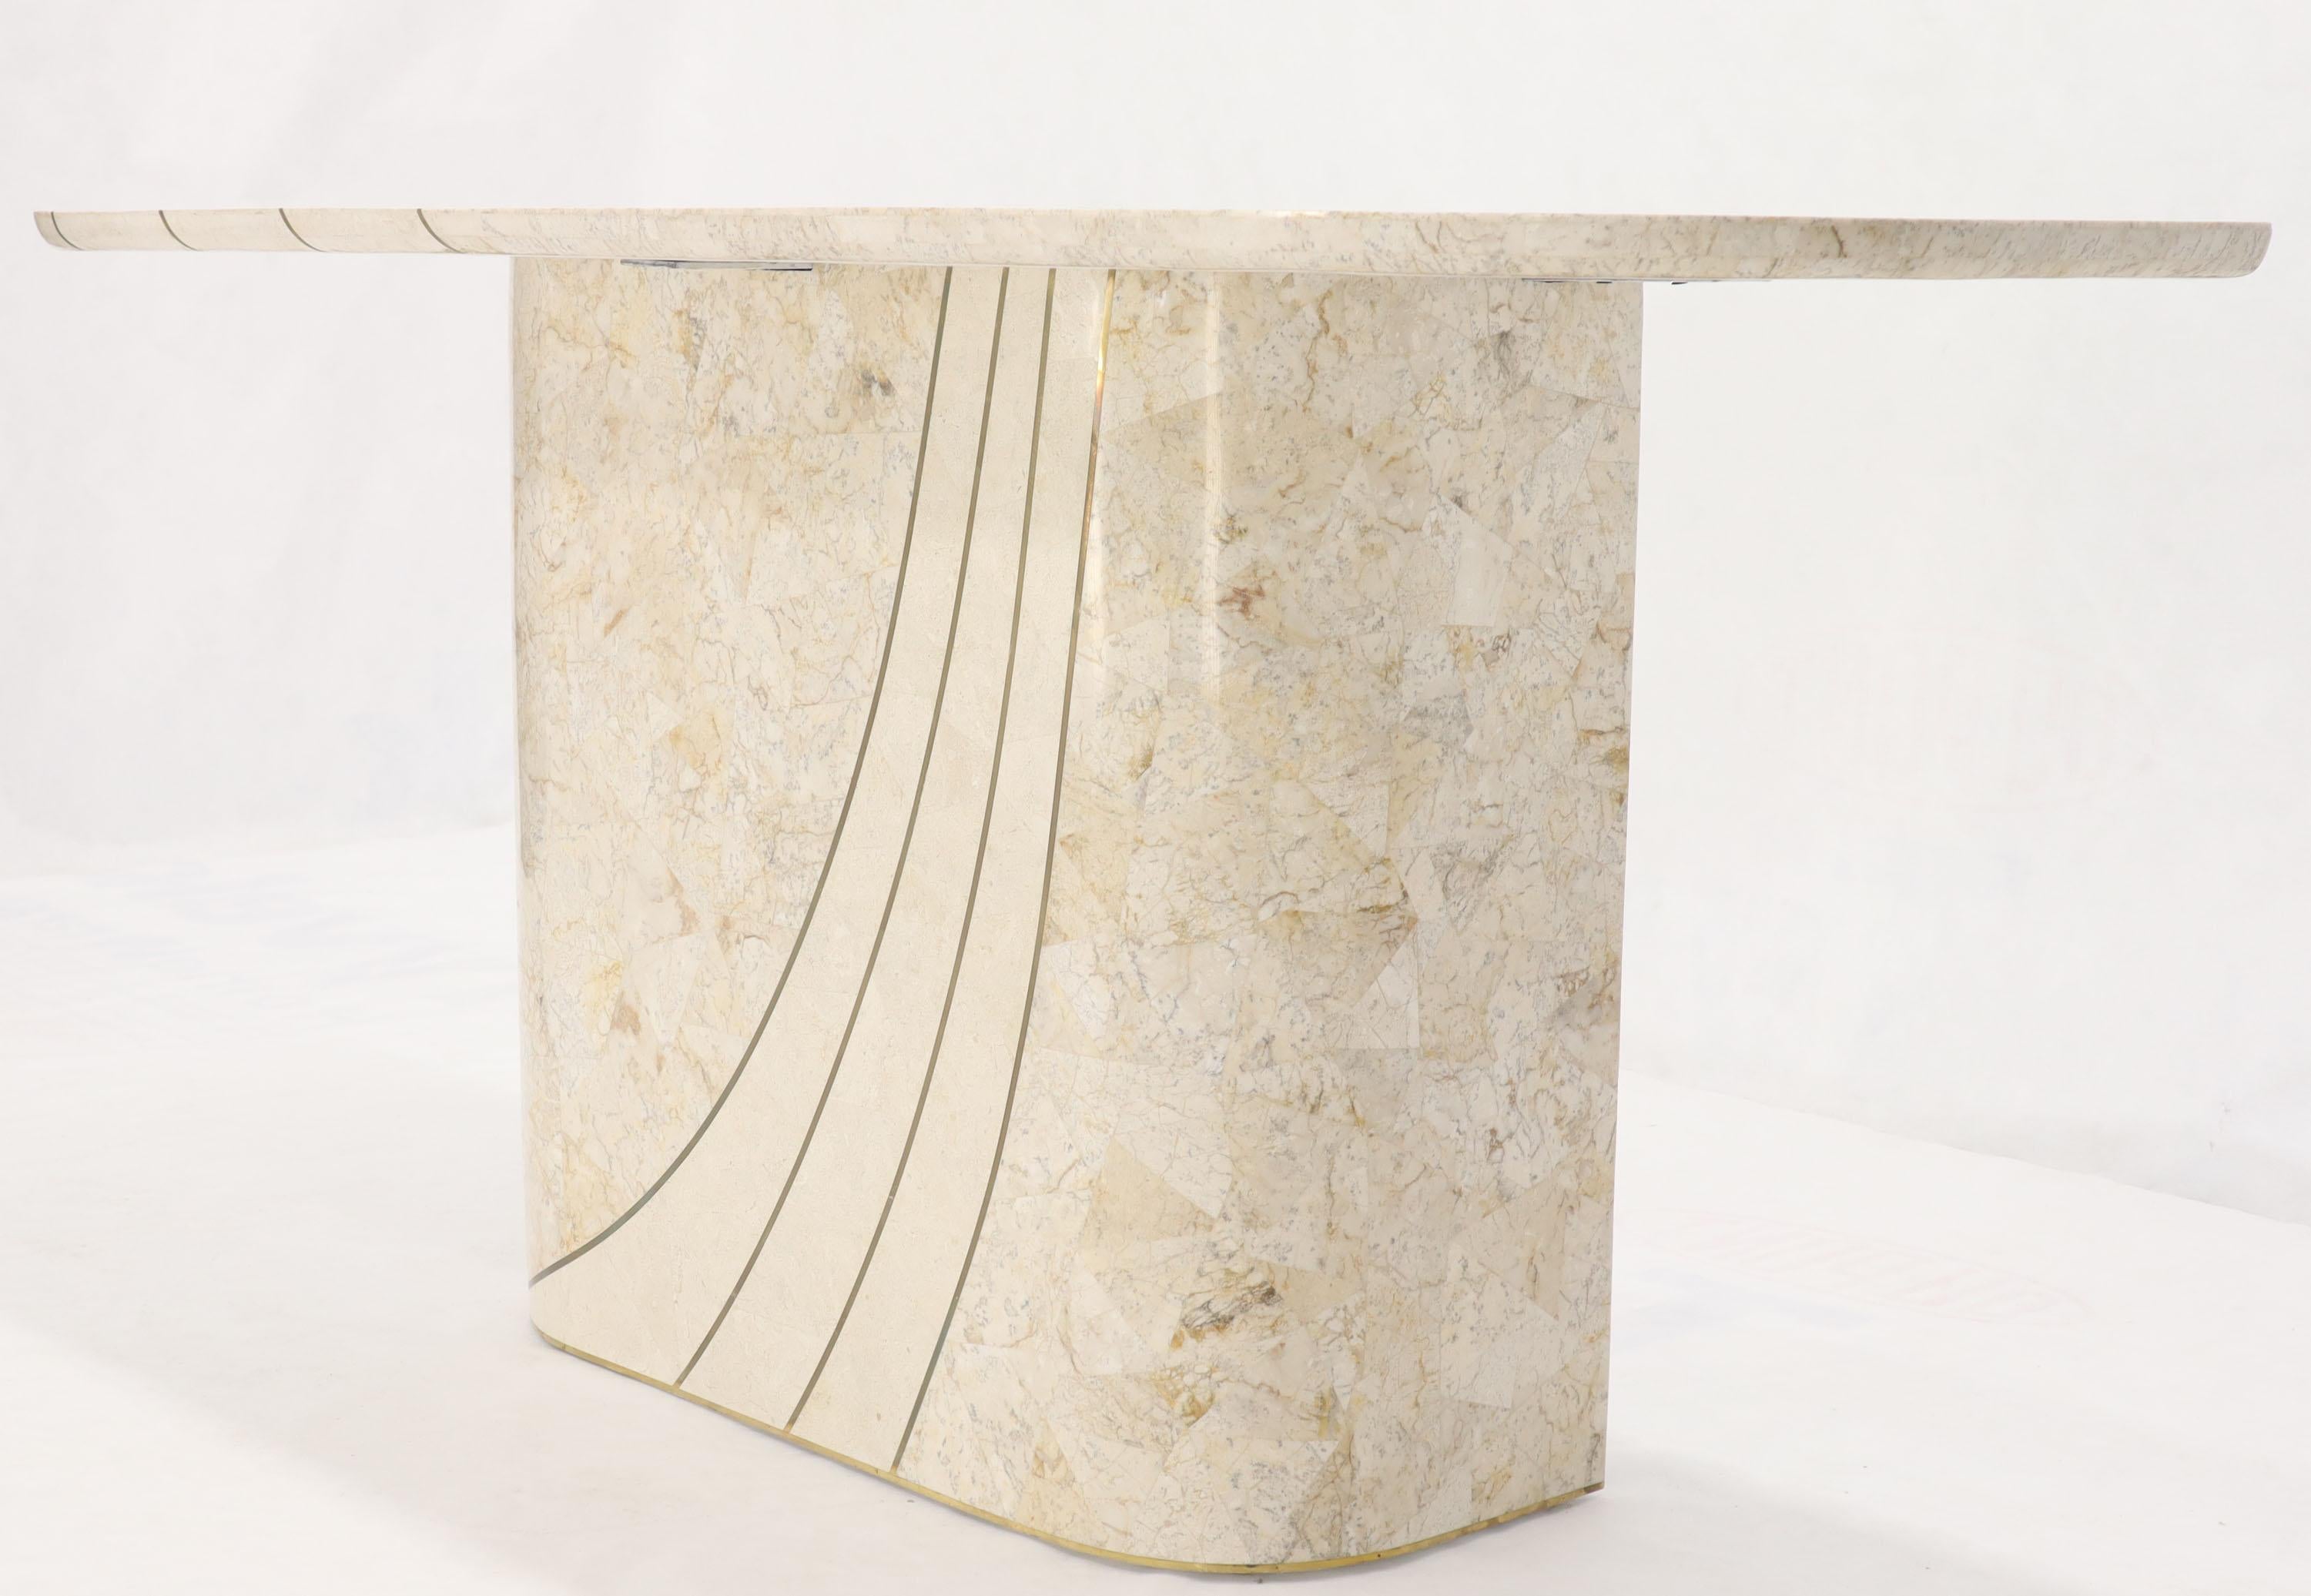 20th Century Tessellated Stone Veneer Tile Brass Inlay Pedestal Base Console Sofa Table For Sale